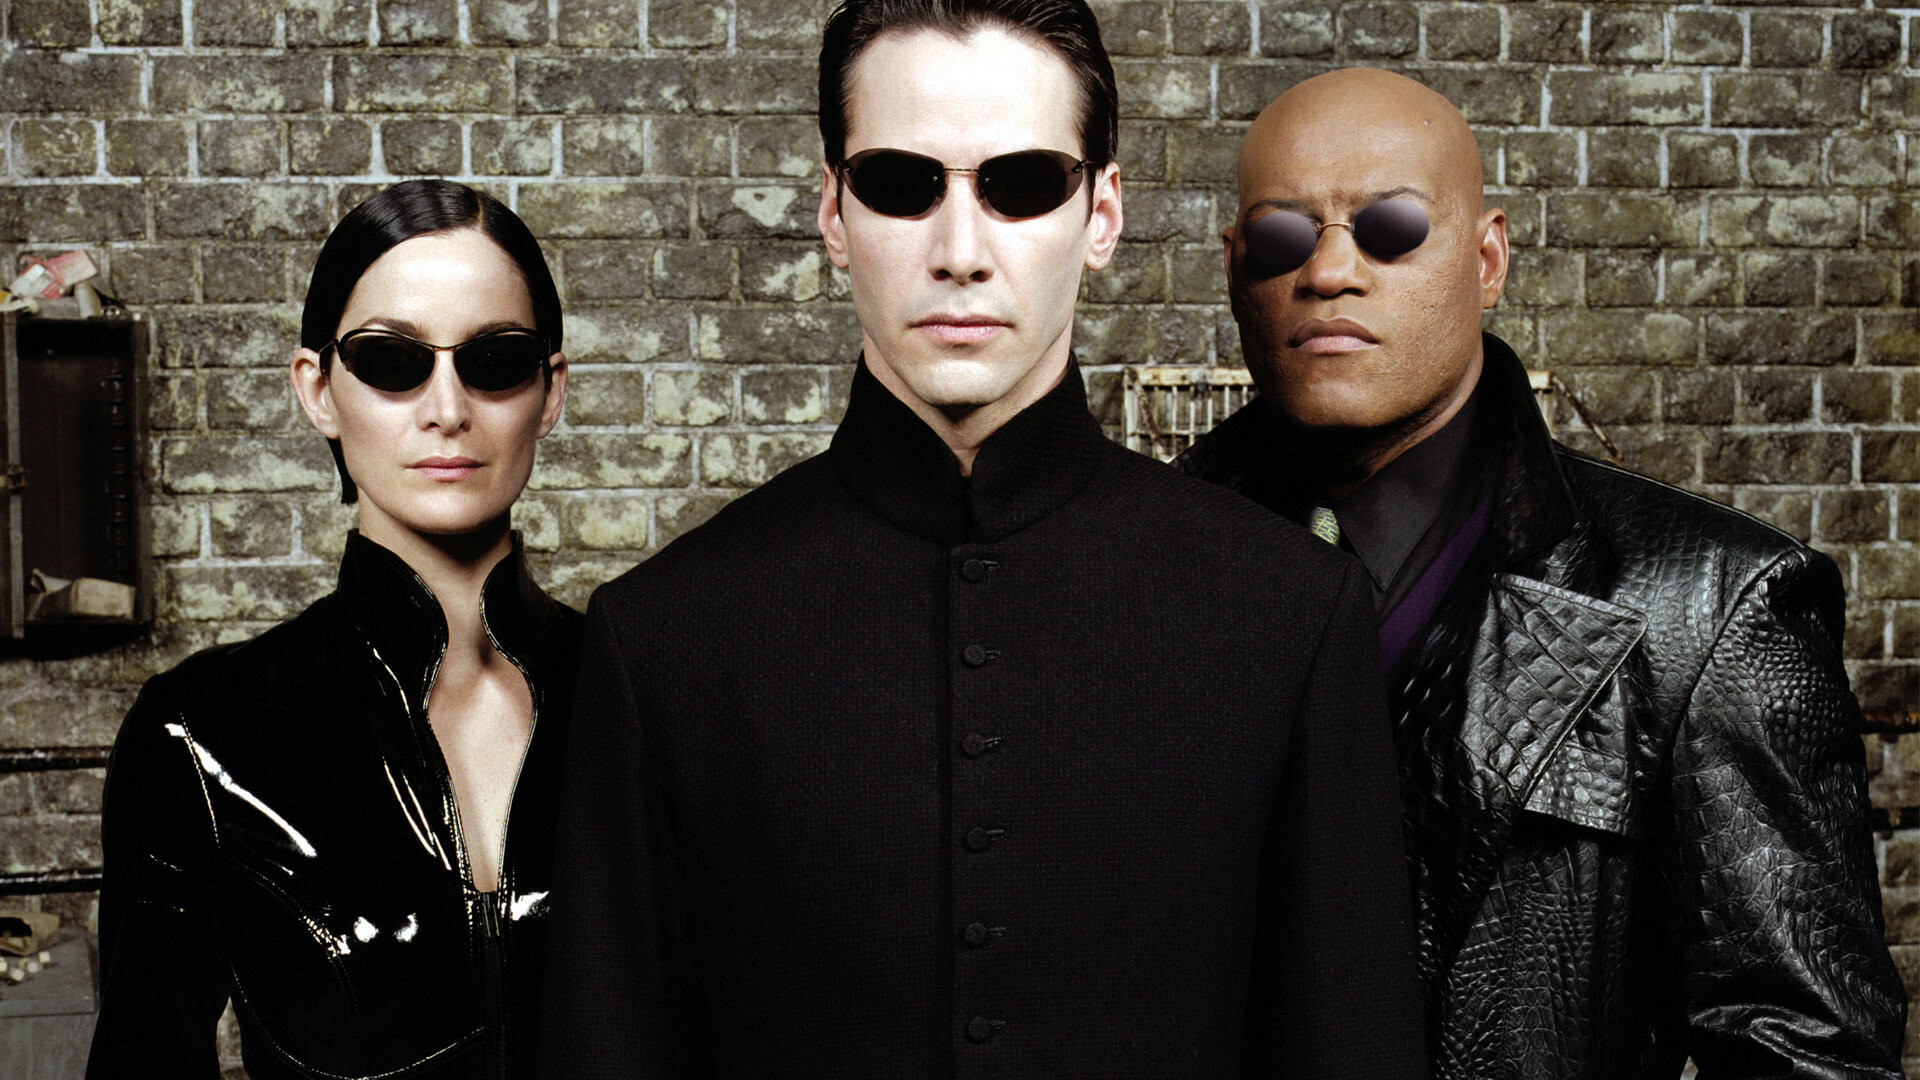 Matrix Franchise: Keanu Reeves as Thomas Anderson/Neo, Trinity, Morpheus, Fictional characters. 1920x1080 Full HD Background.